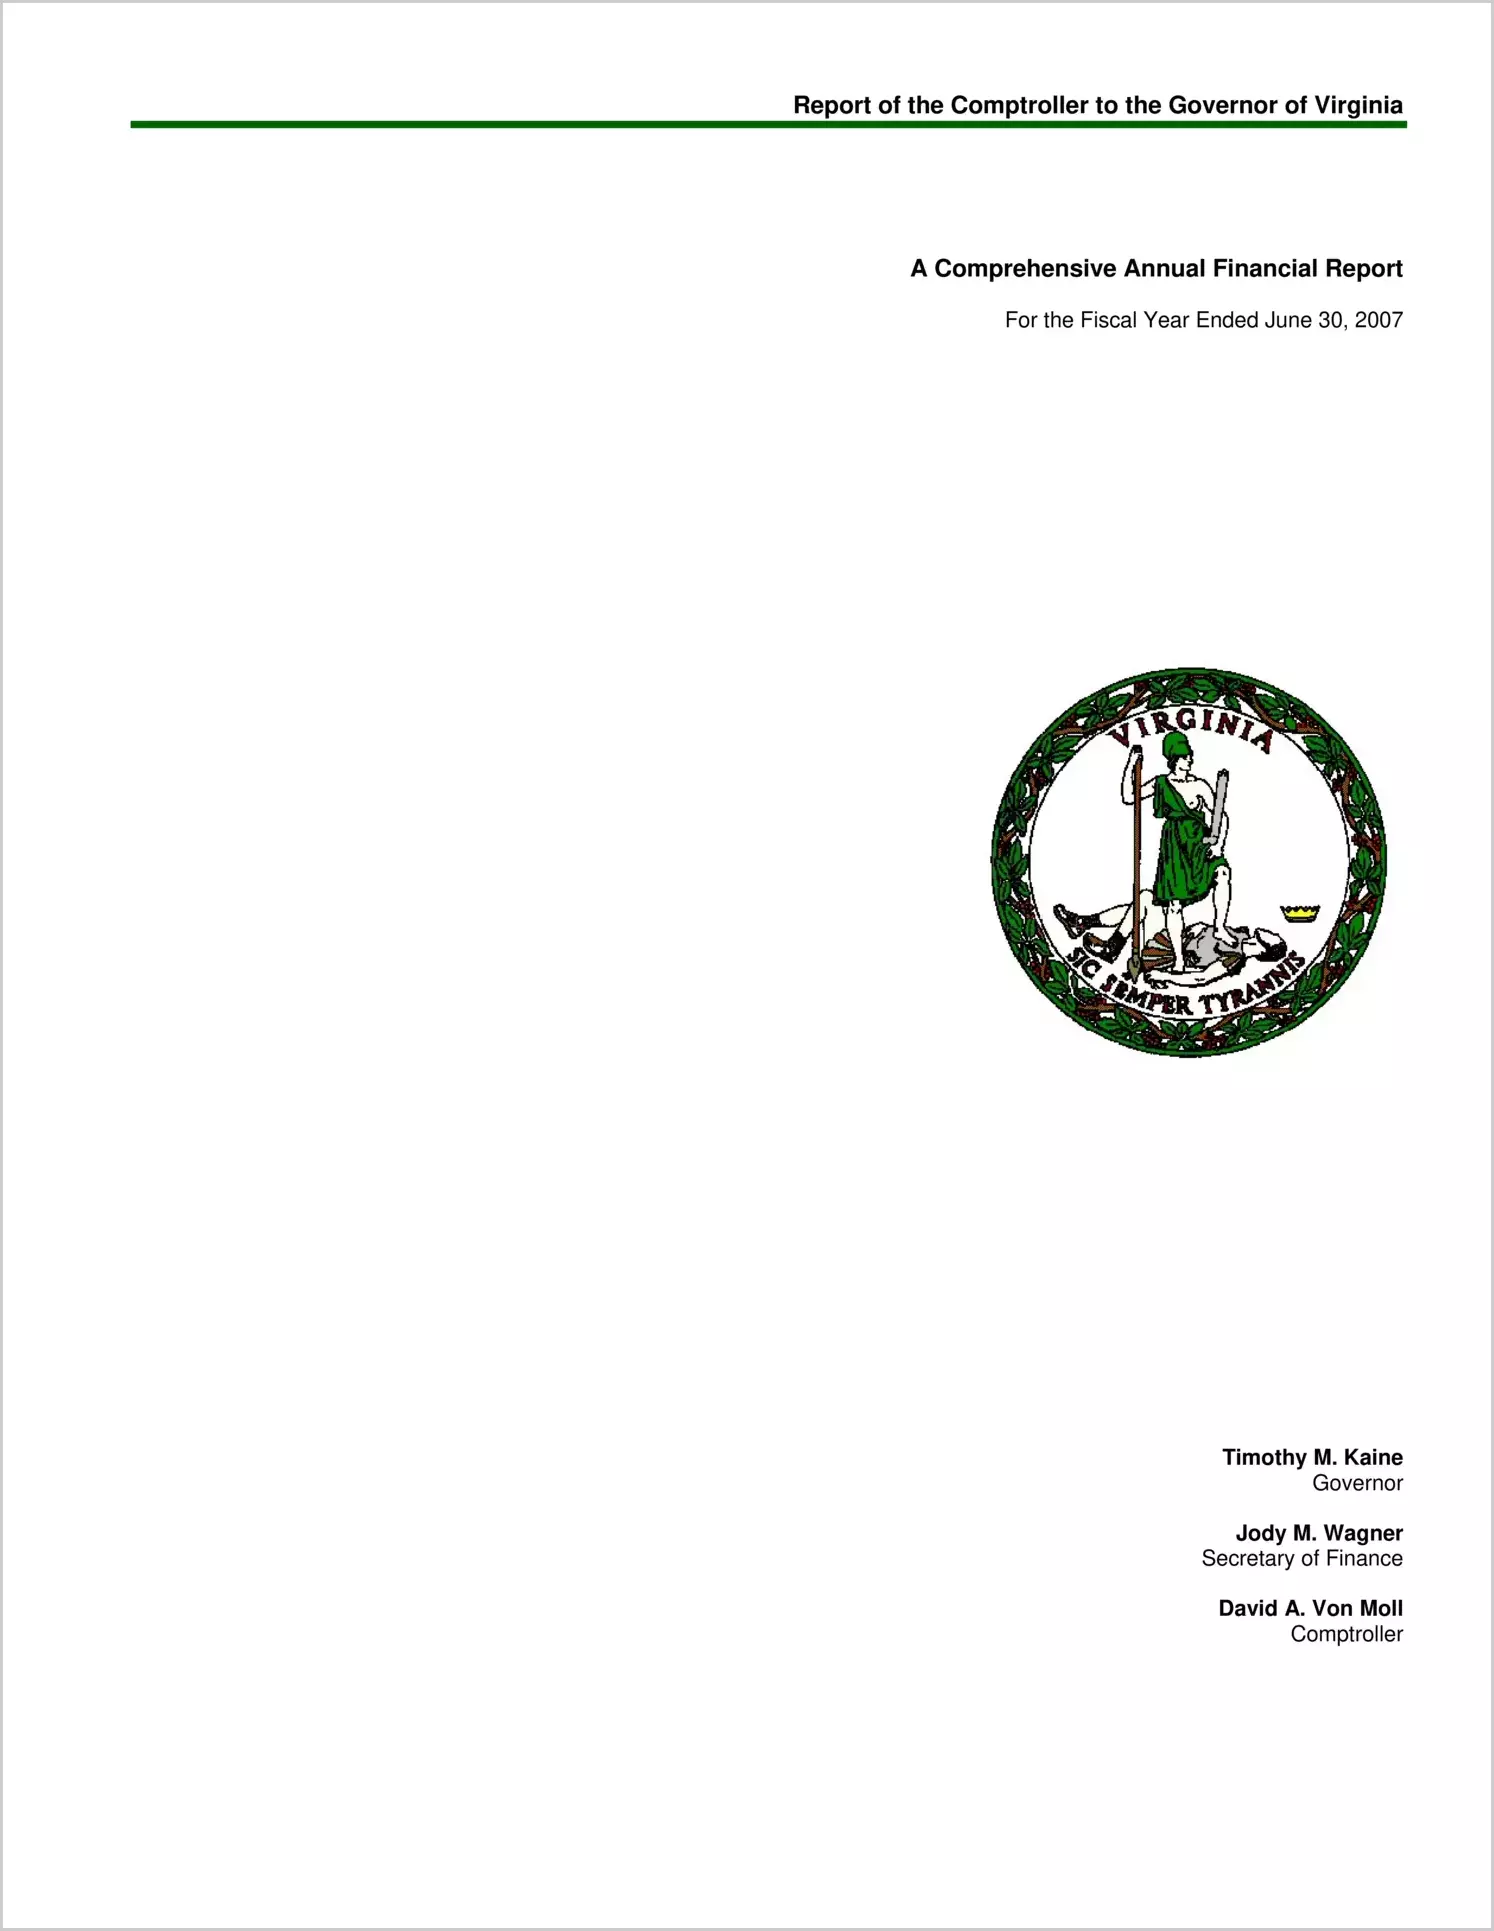 A Comprehensive Annual Financial Report for the fiscal year ended June 30, 2007